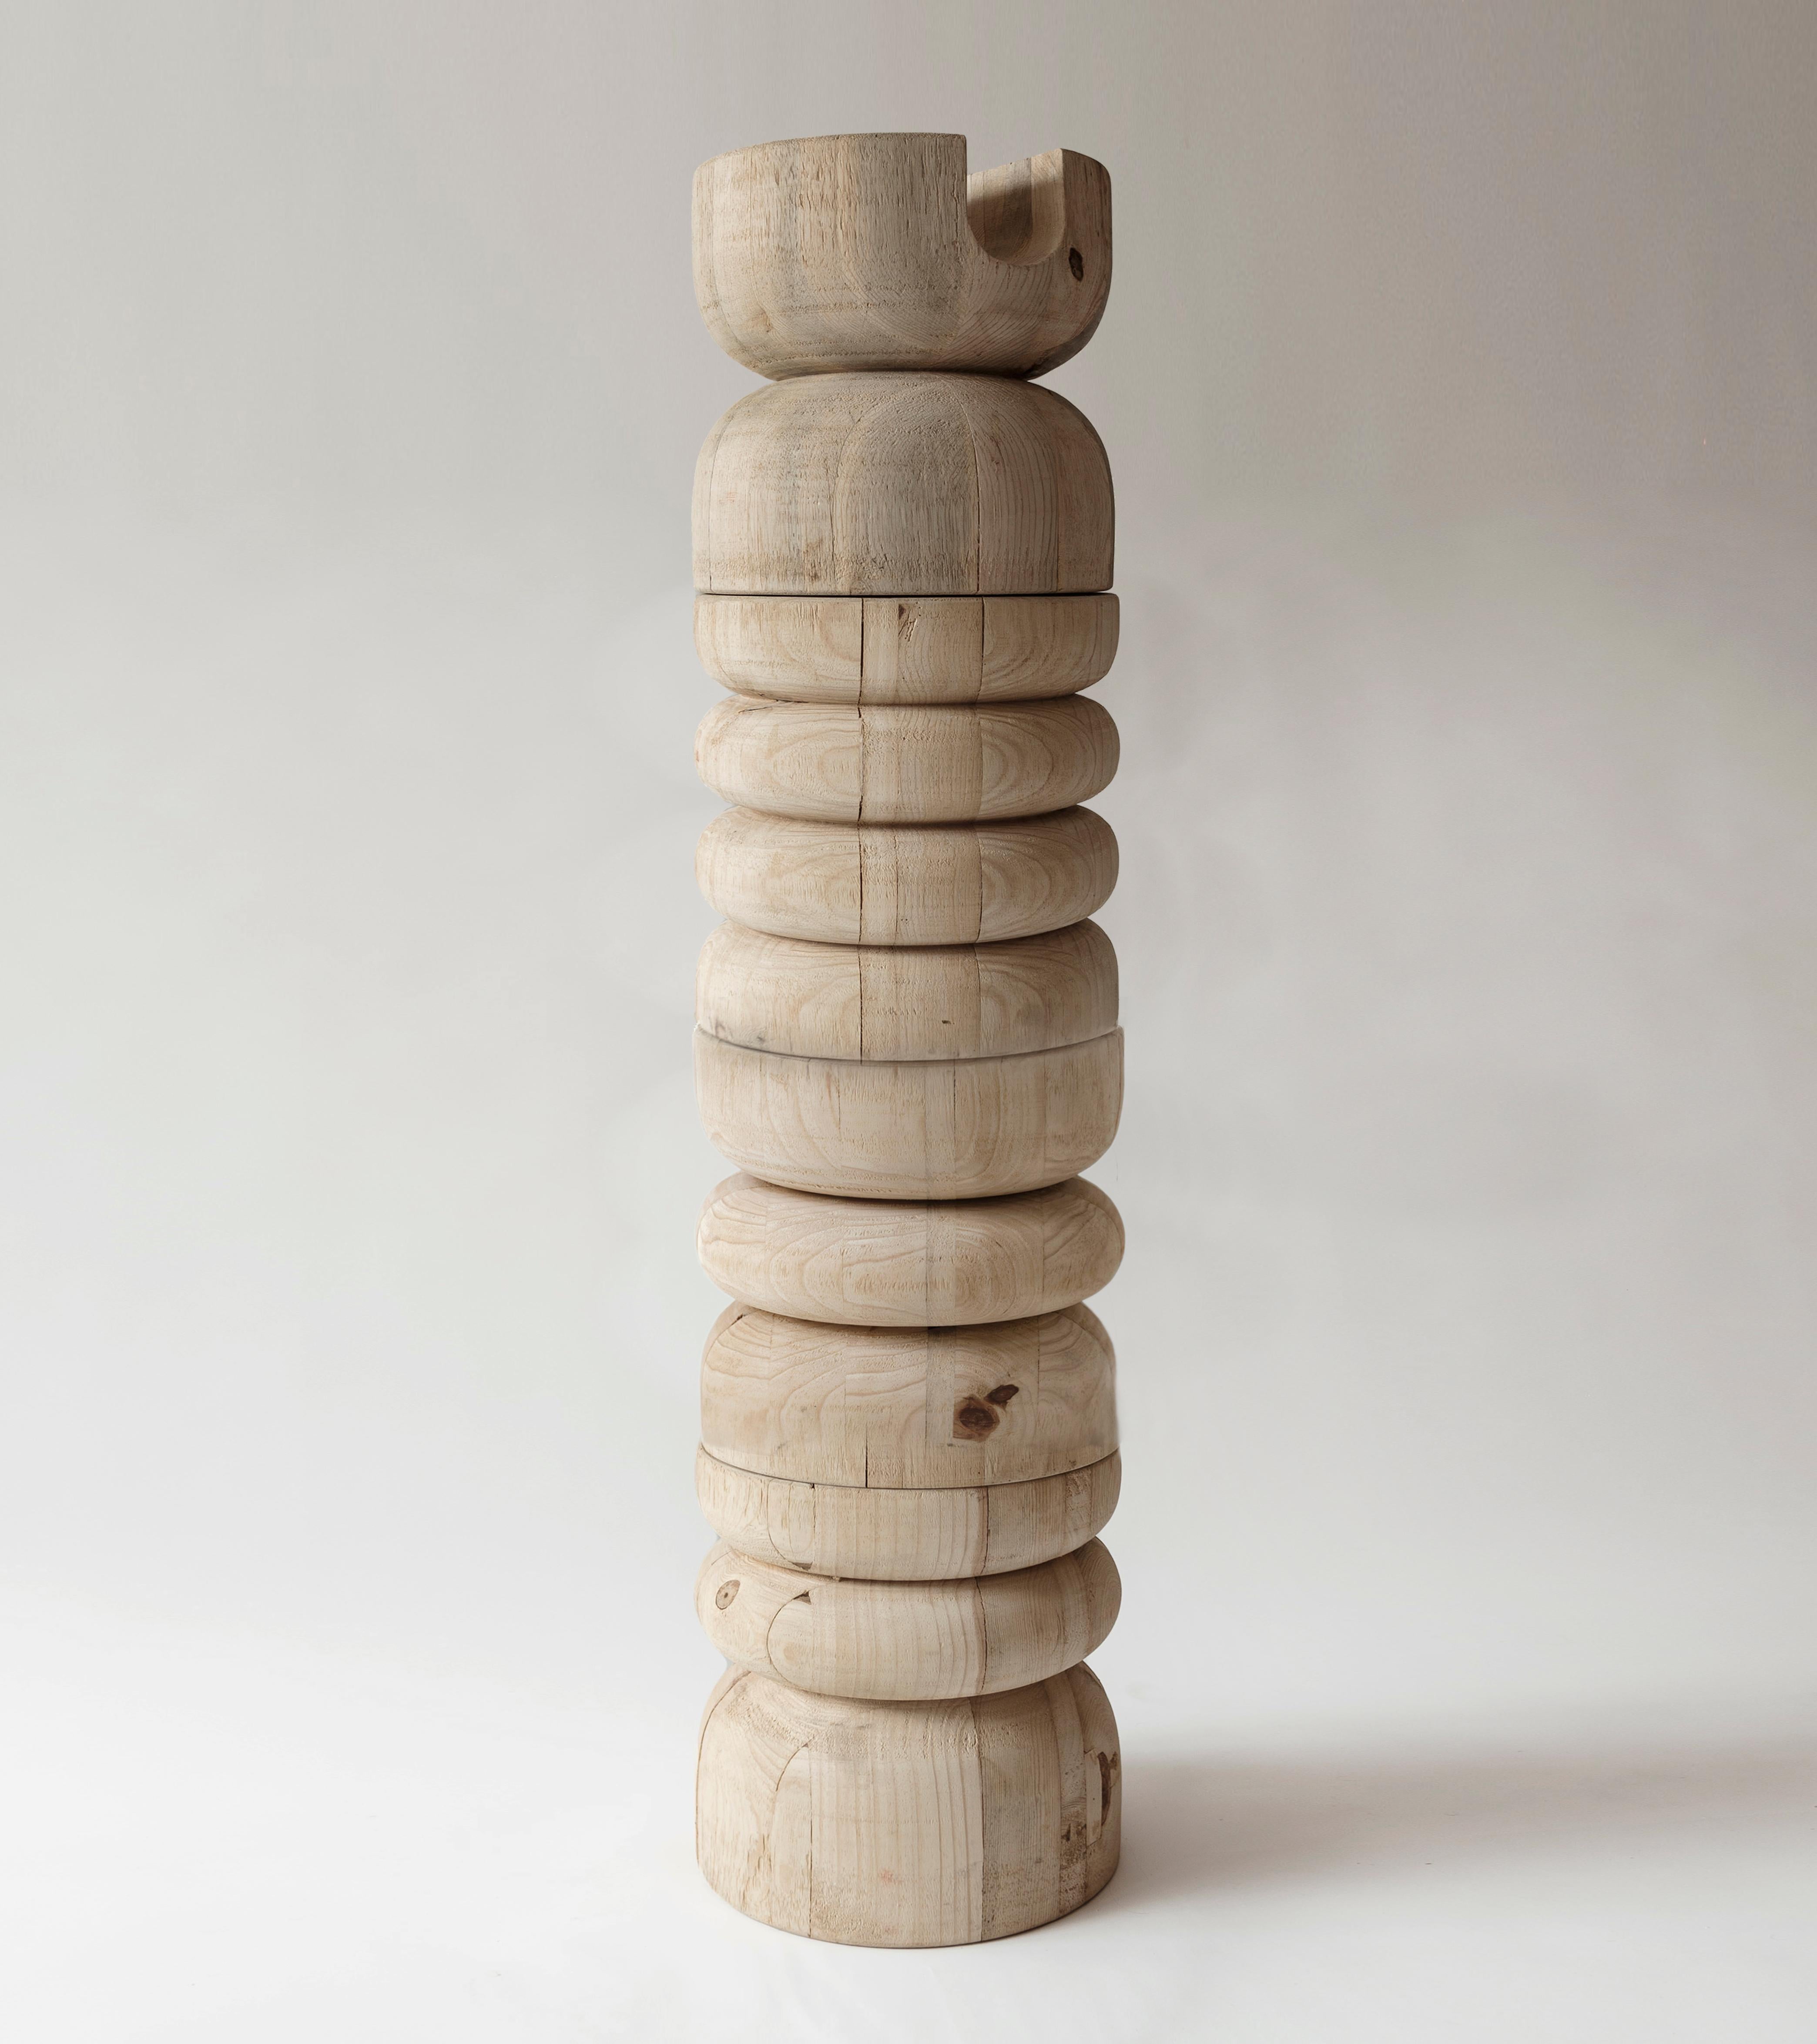 4 Neru stackable TOTEM

Utility sculpture:
1 Neru, functions as a stool/table 
Create your own TOTEM by stacking 3 or 4 Nerus!
Material: Radiata wood (Indoors)

Rebeca Cors (México, 1988) works as an independent artist under the name CORS by